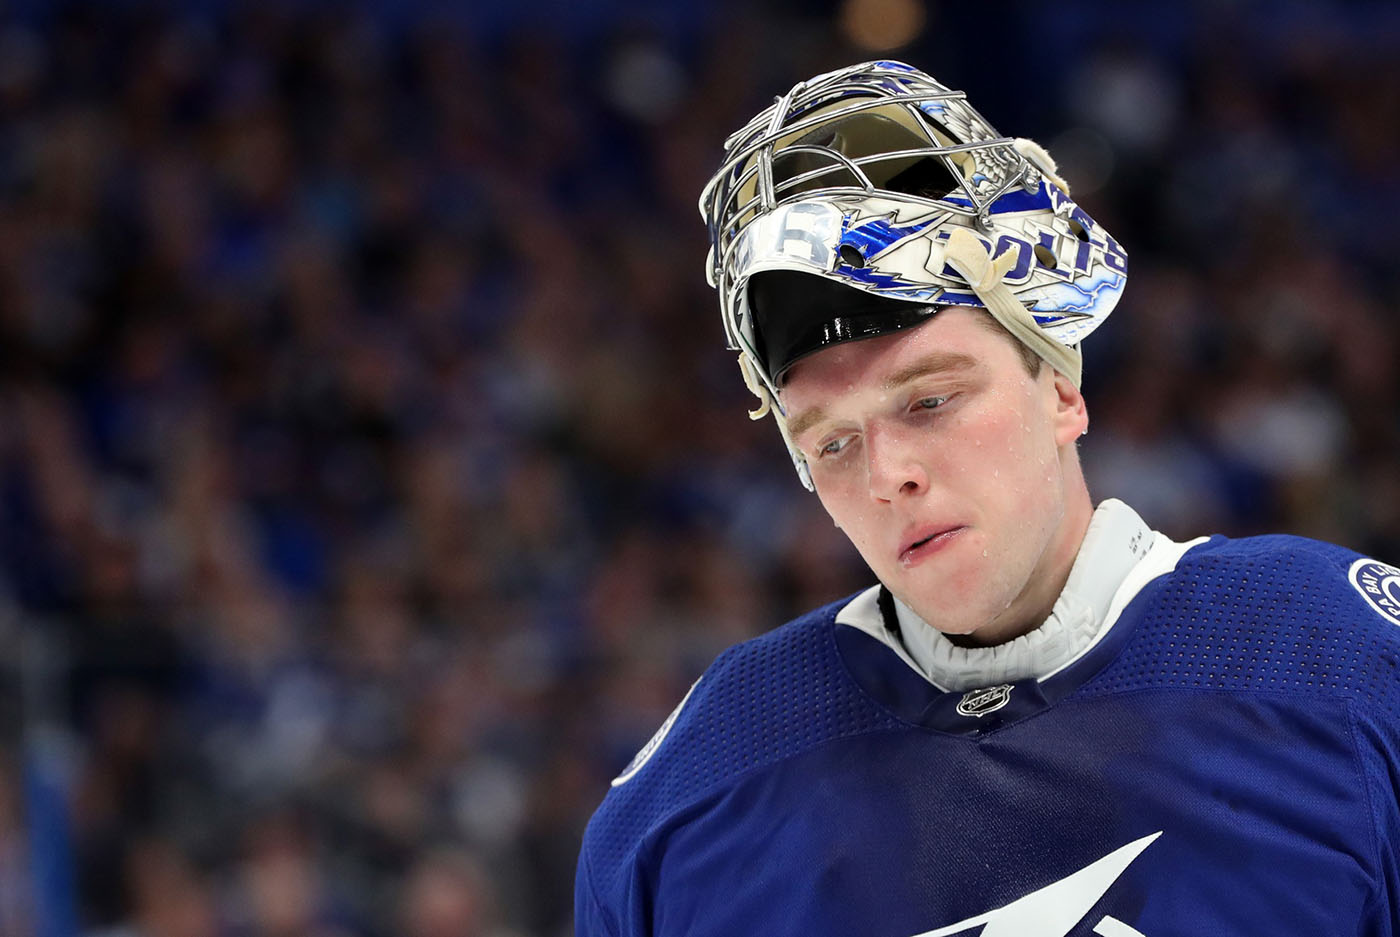 Bolts coach confident team will manage without Vasilevskiy